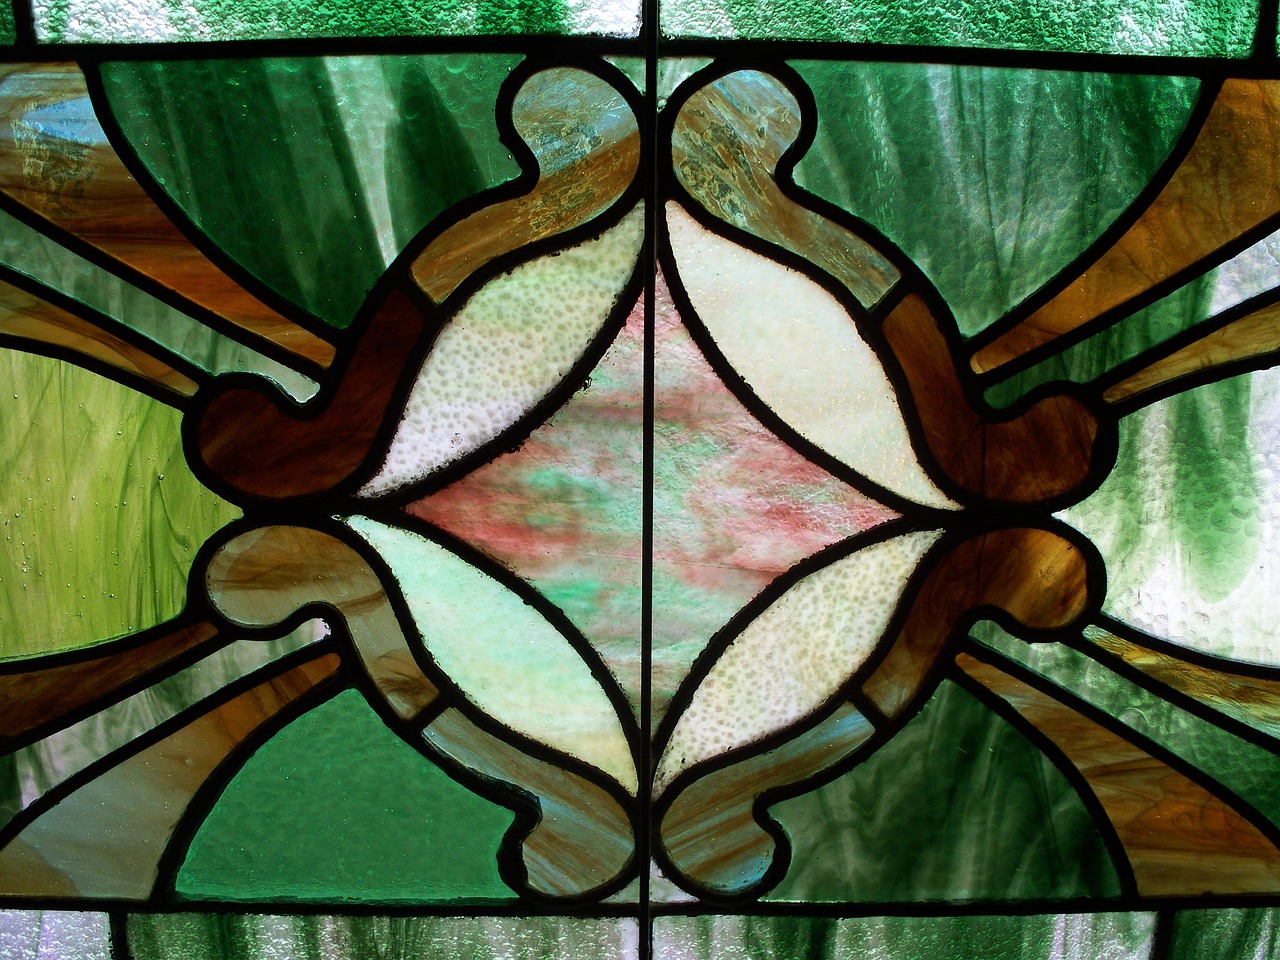 Green Stained Glass from Pixabay